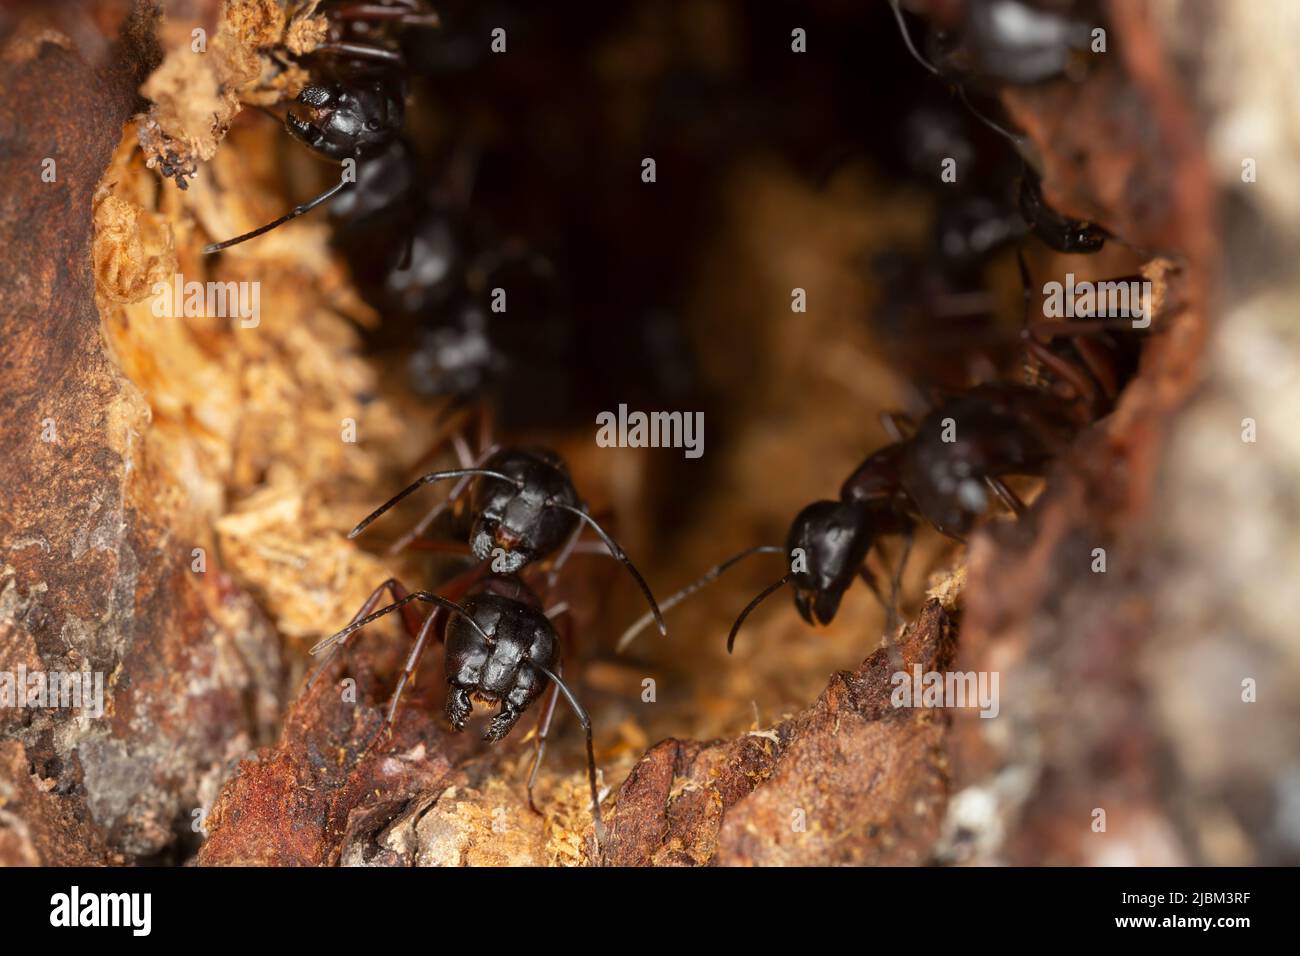 Carpenter ants, Camponotus guarding hole in aspen wood, this insect can be a major pest on wood Stock Photo